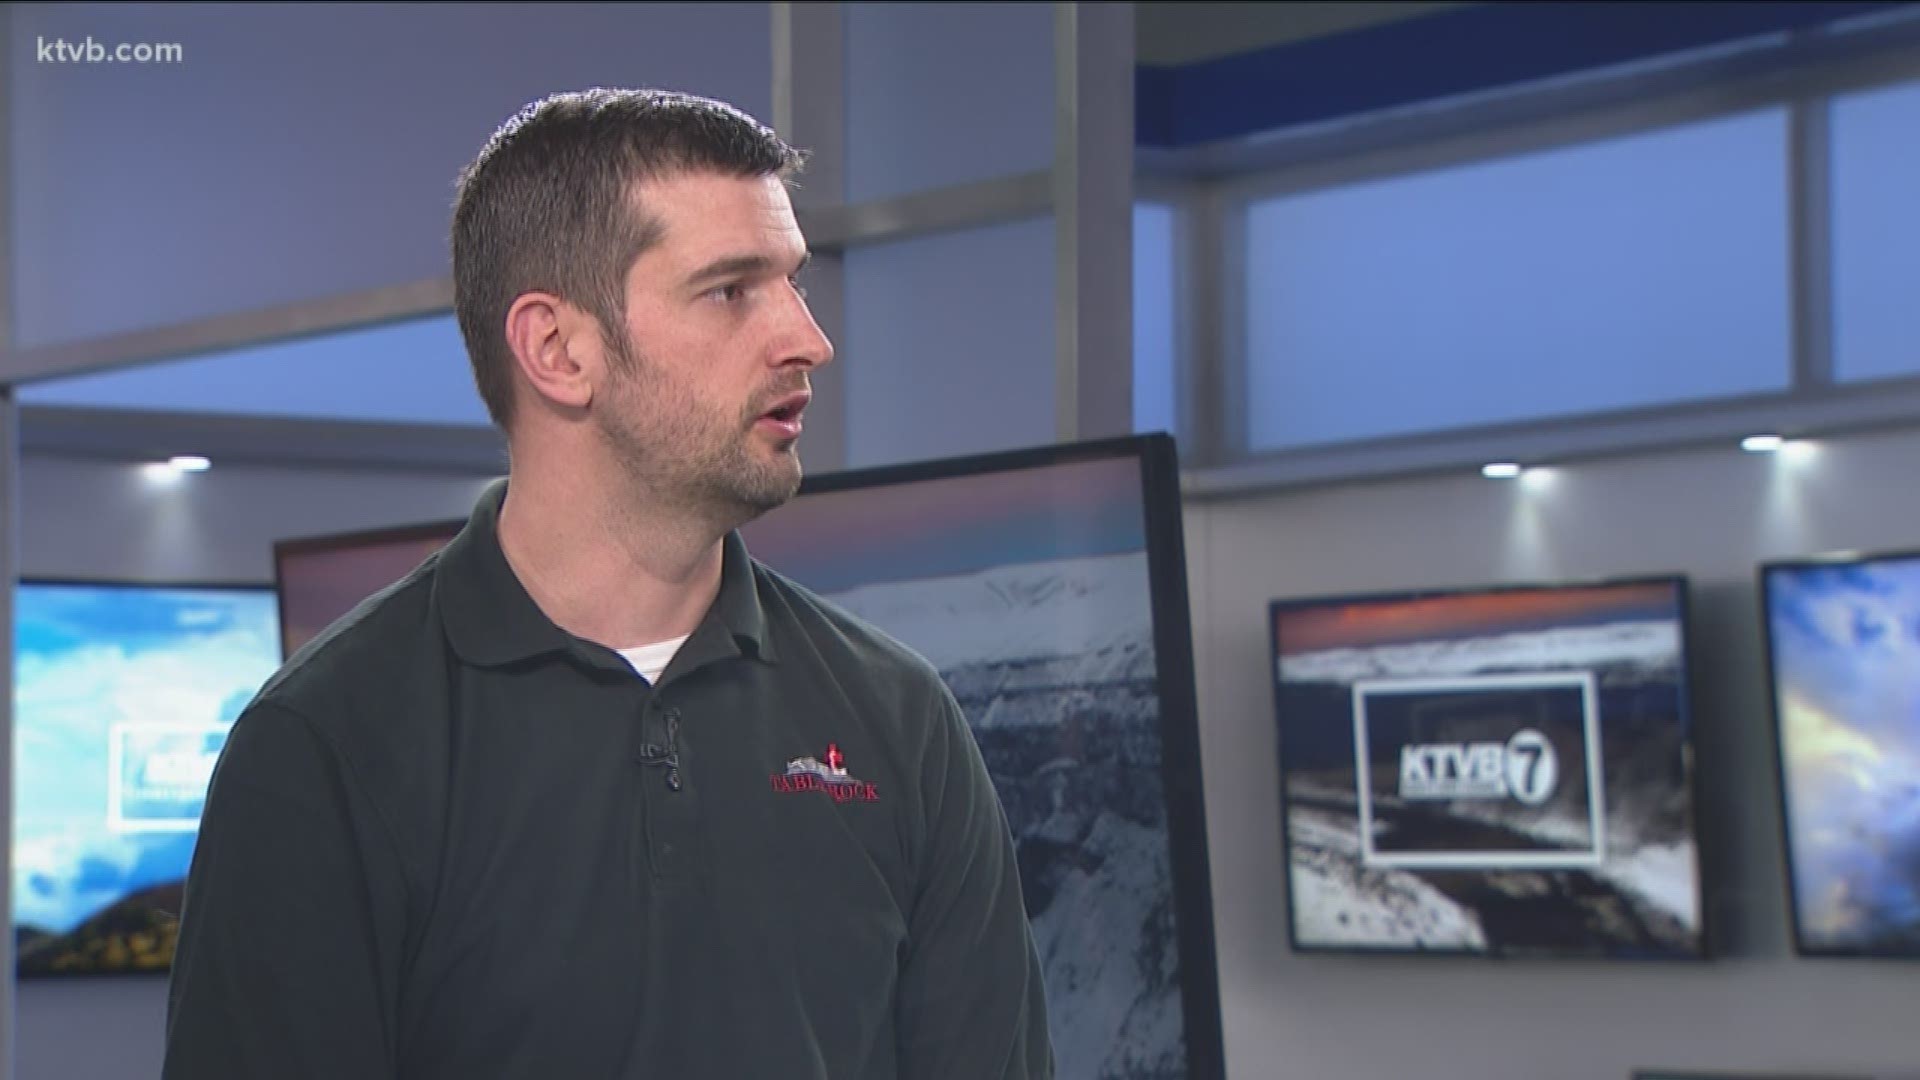 Brad Bigford of Table Rock Medicine said the most common symptoms are a dry cough, fever, and shortness of breath.